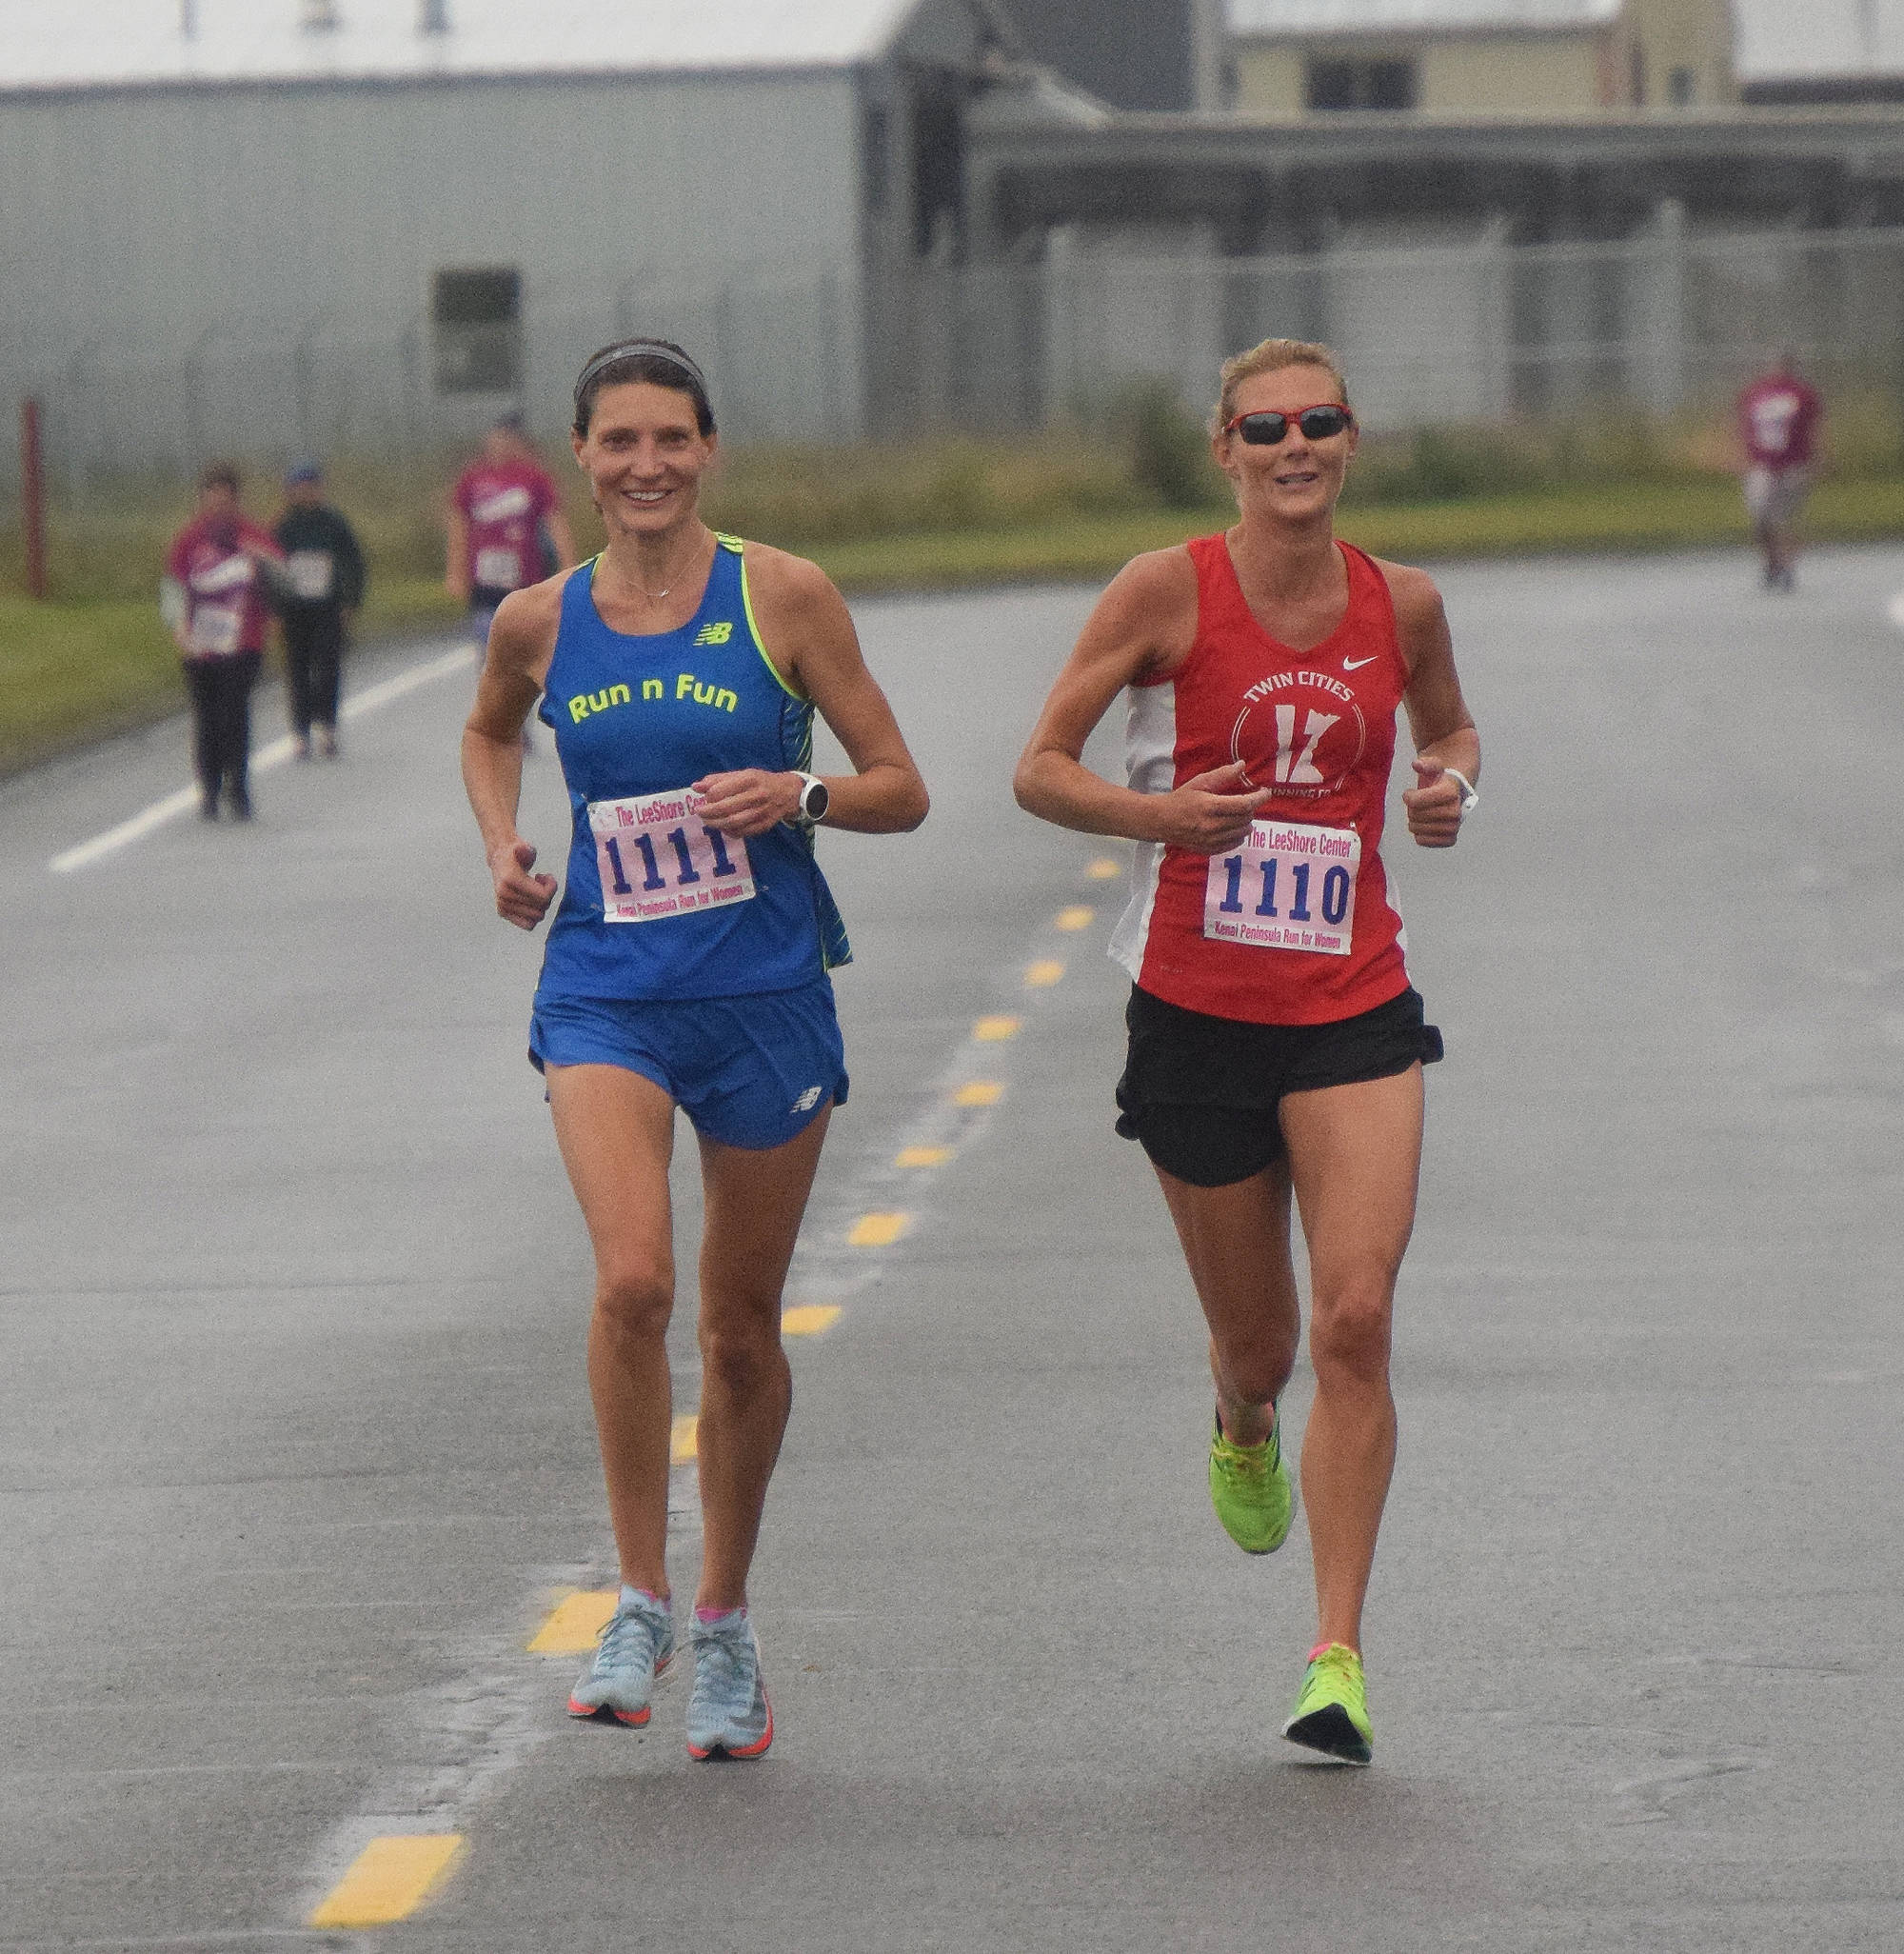 Angie Voight (left) and Casey Schwarz approach the finish of the women’s 10K race Saturday morning in the 31st annual LeeShore Center Run for Women in Kenai. (Photo by Joey Klecka/Peninsula Clarion)